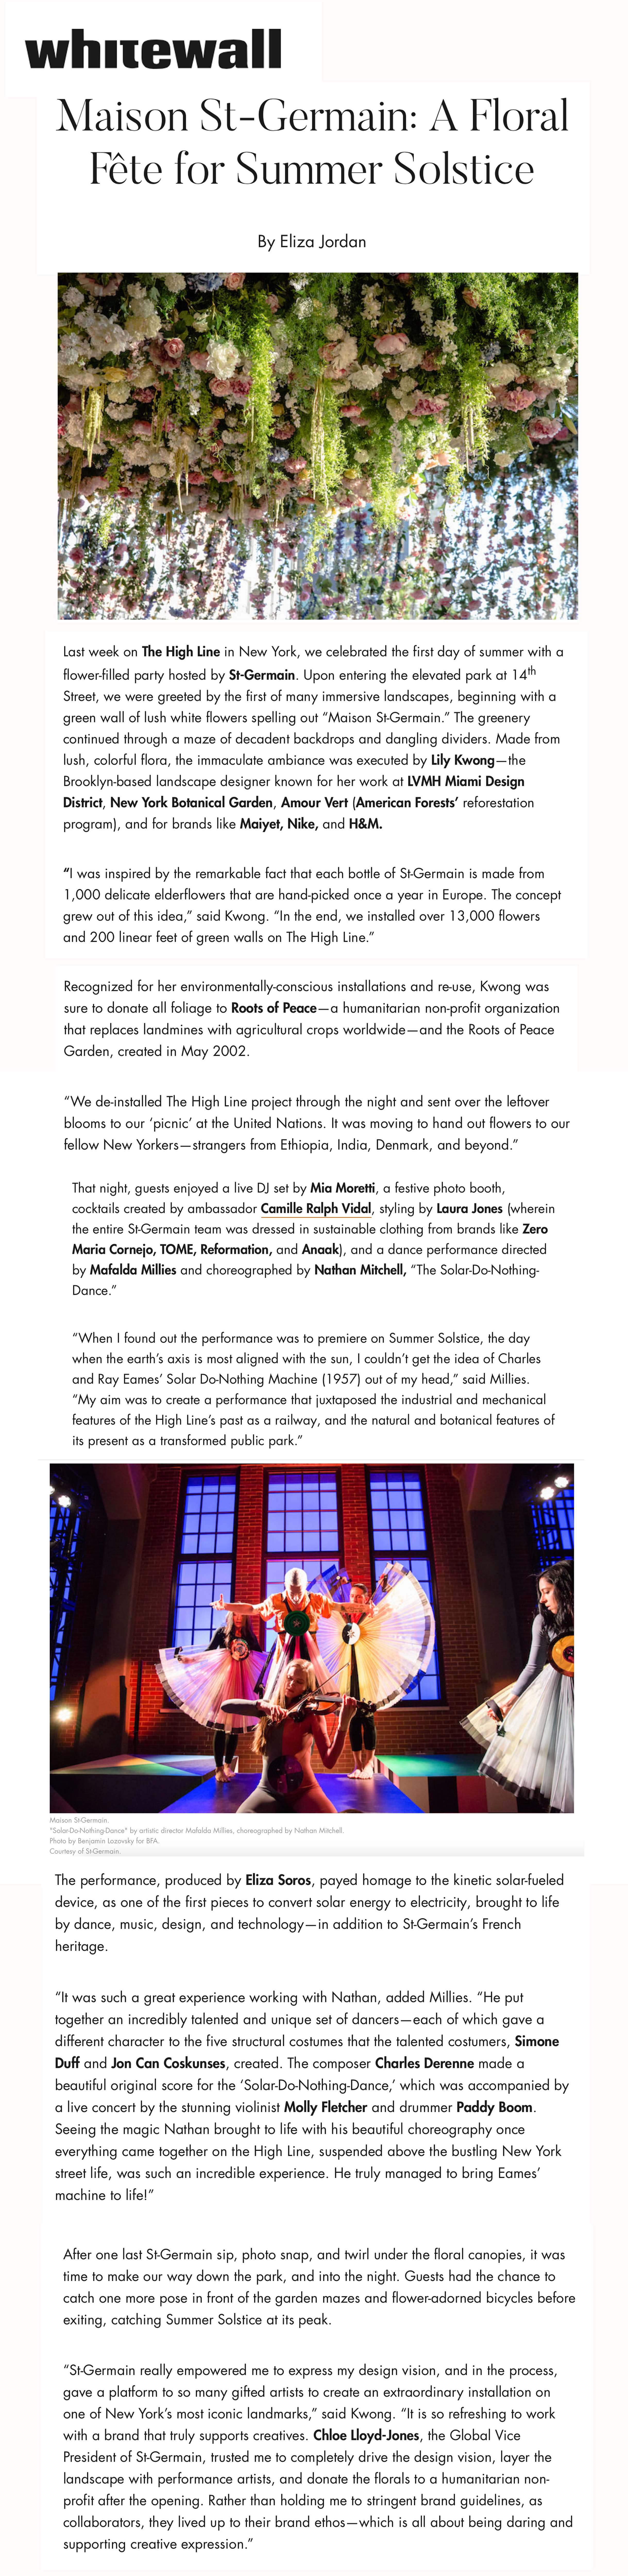 WHITEWALL Article on Summer Soltice Performance Art Directed by Mafalda Millies on NYC Highline.jpg